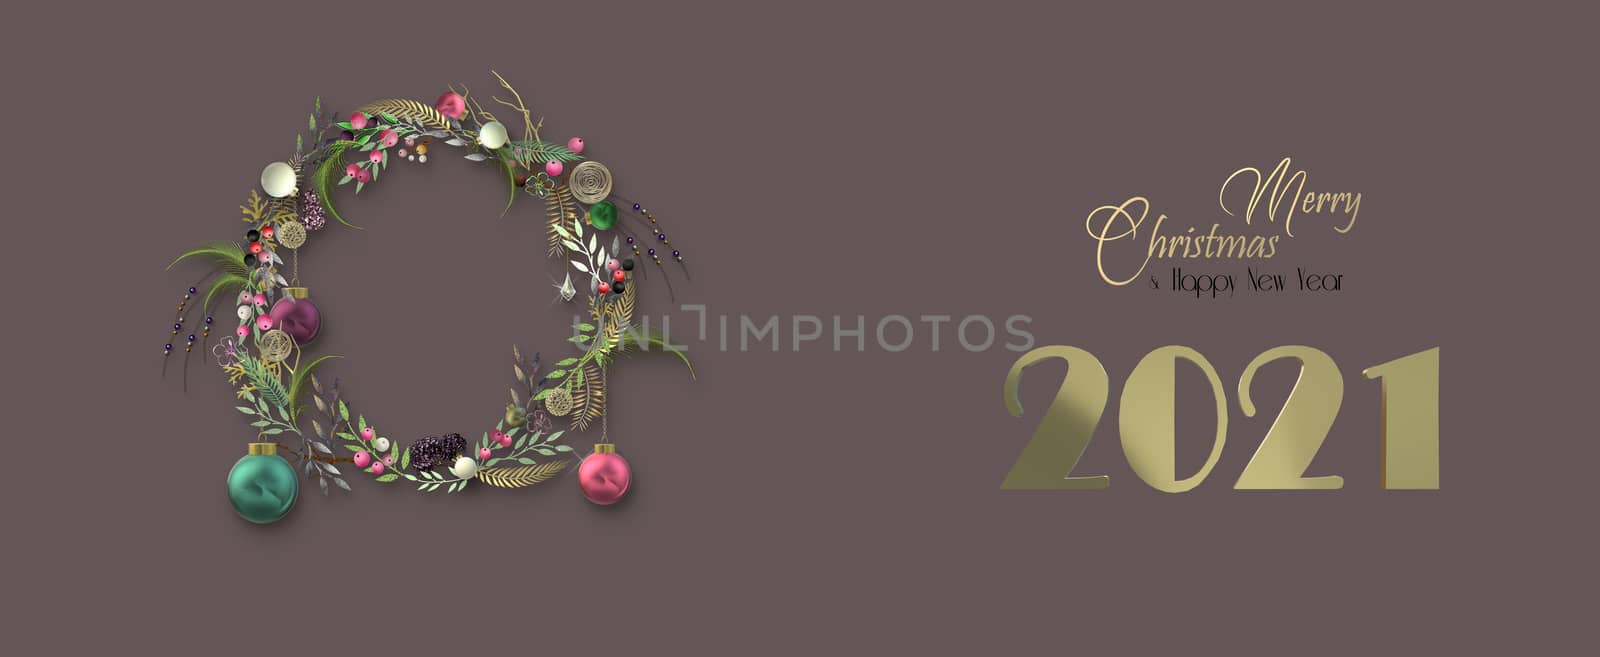 Christmas New Year 2021 background with 3D Xmas wreath, balls, digit 2021 on pastel brown background. Gold text Merry Christmas Happy New Year. Horizontal 3D illustration. Copy space, place for text